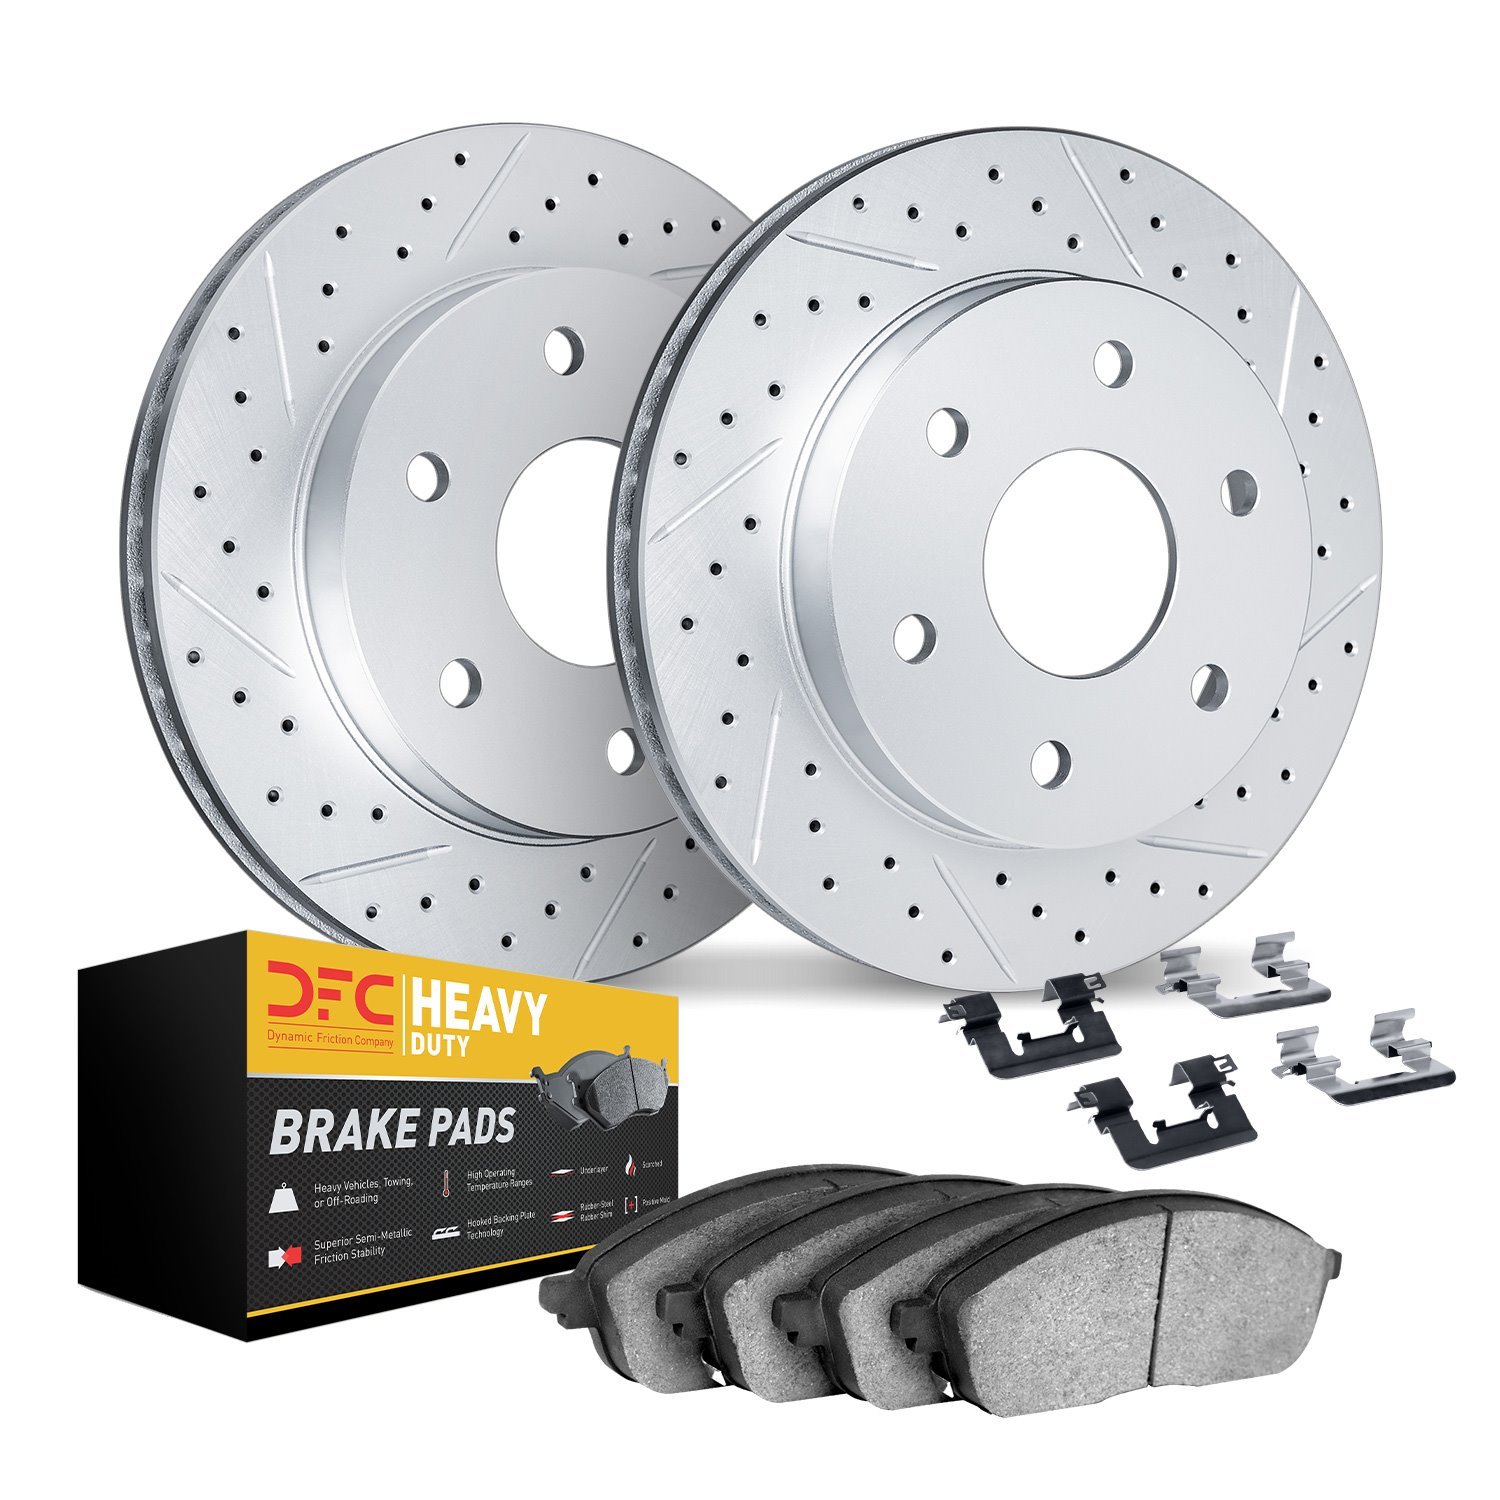 2212-40061 Geoperformance Drilled/Slotted Rotors w/Heavy-Duty Pads Kit & Hardware, 2003-2003 Mopar, Position: Front